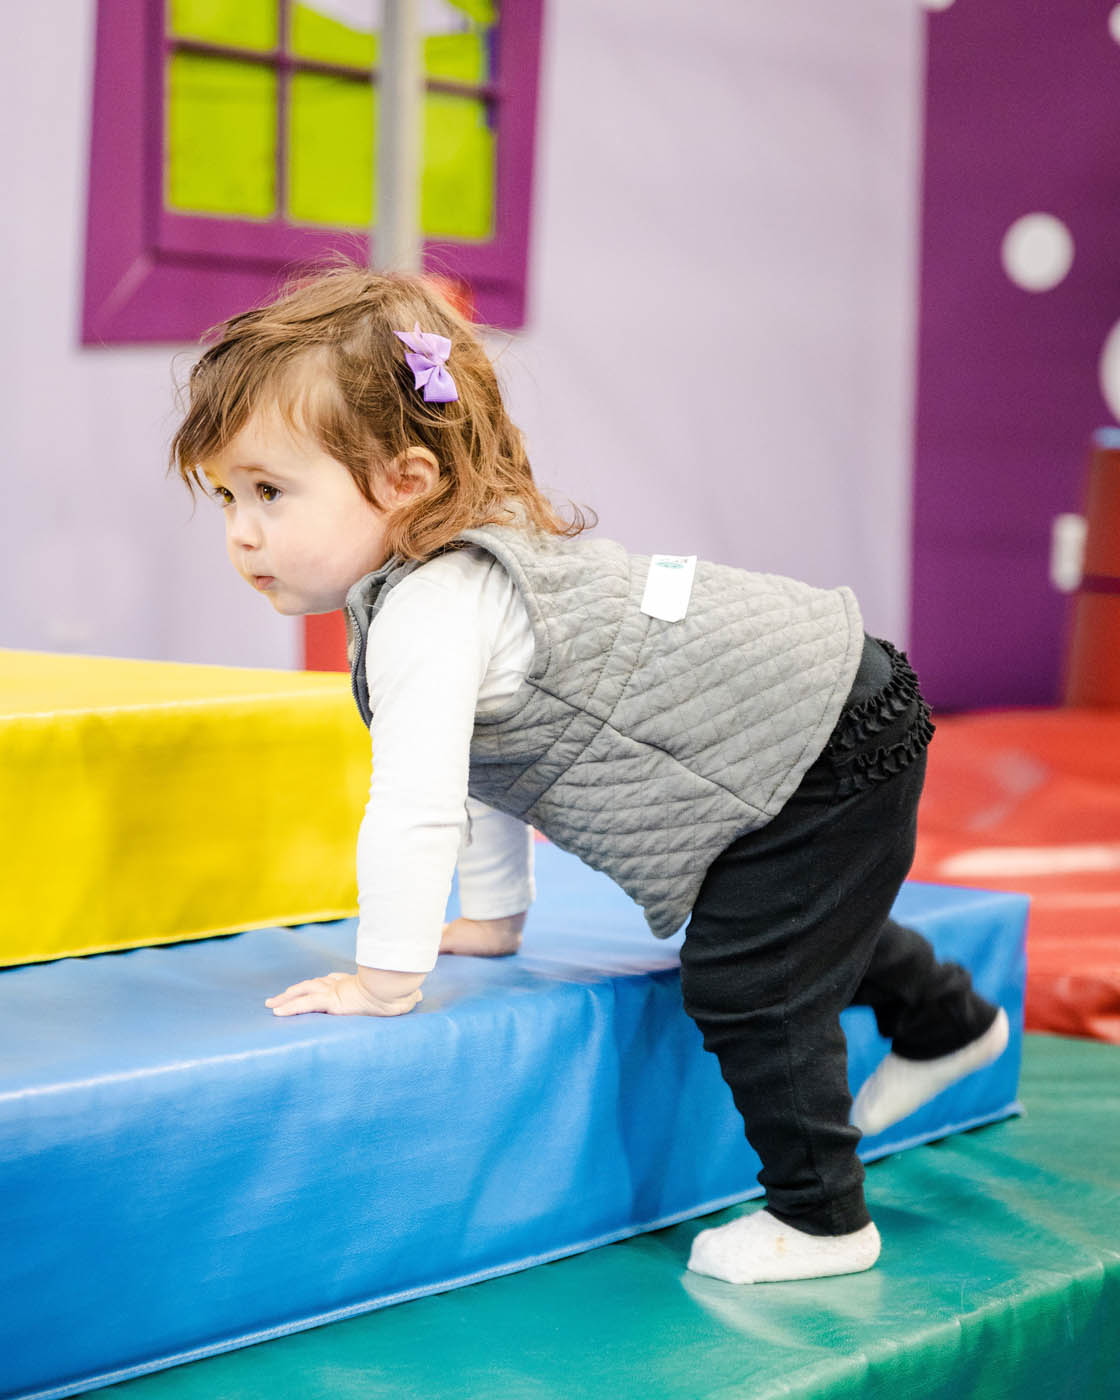 A little girl climbing on soft tumbling equipment for toddlers at Romp n' Roll in Katy, TX.